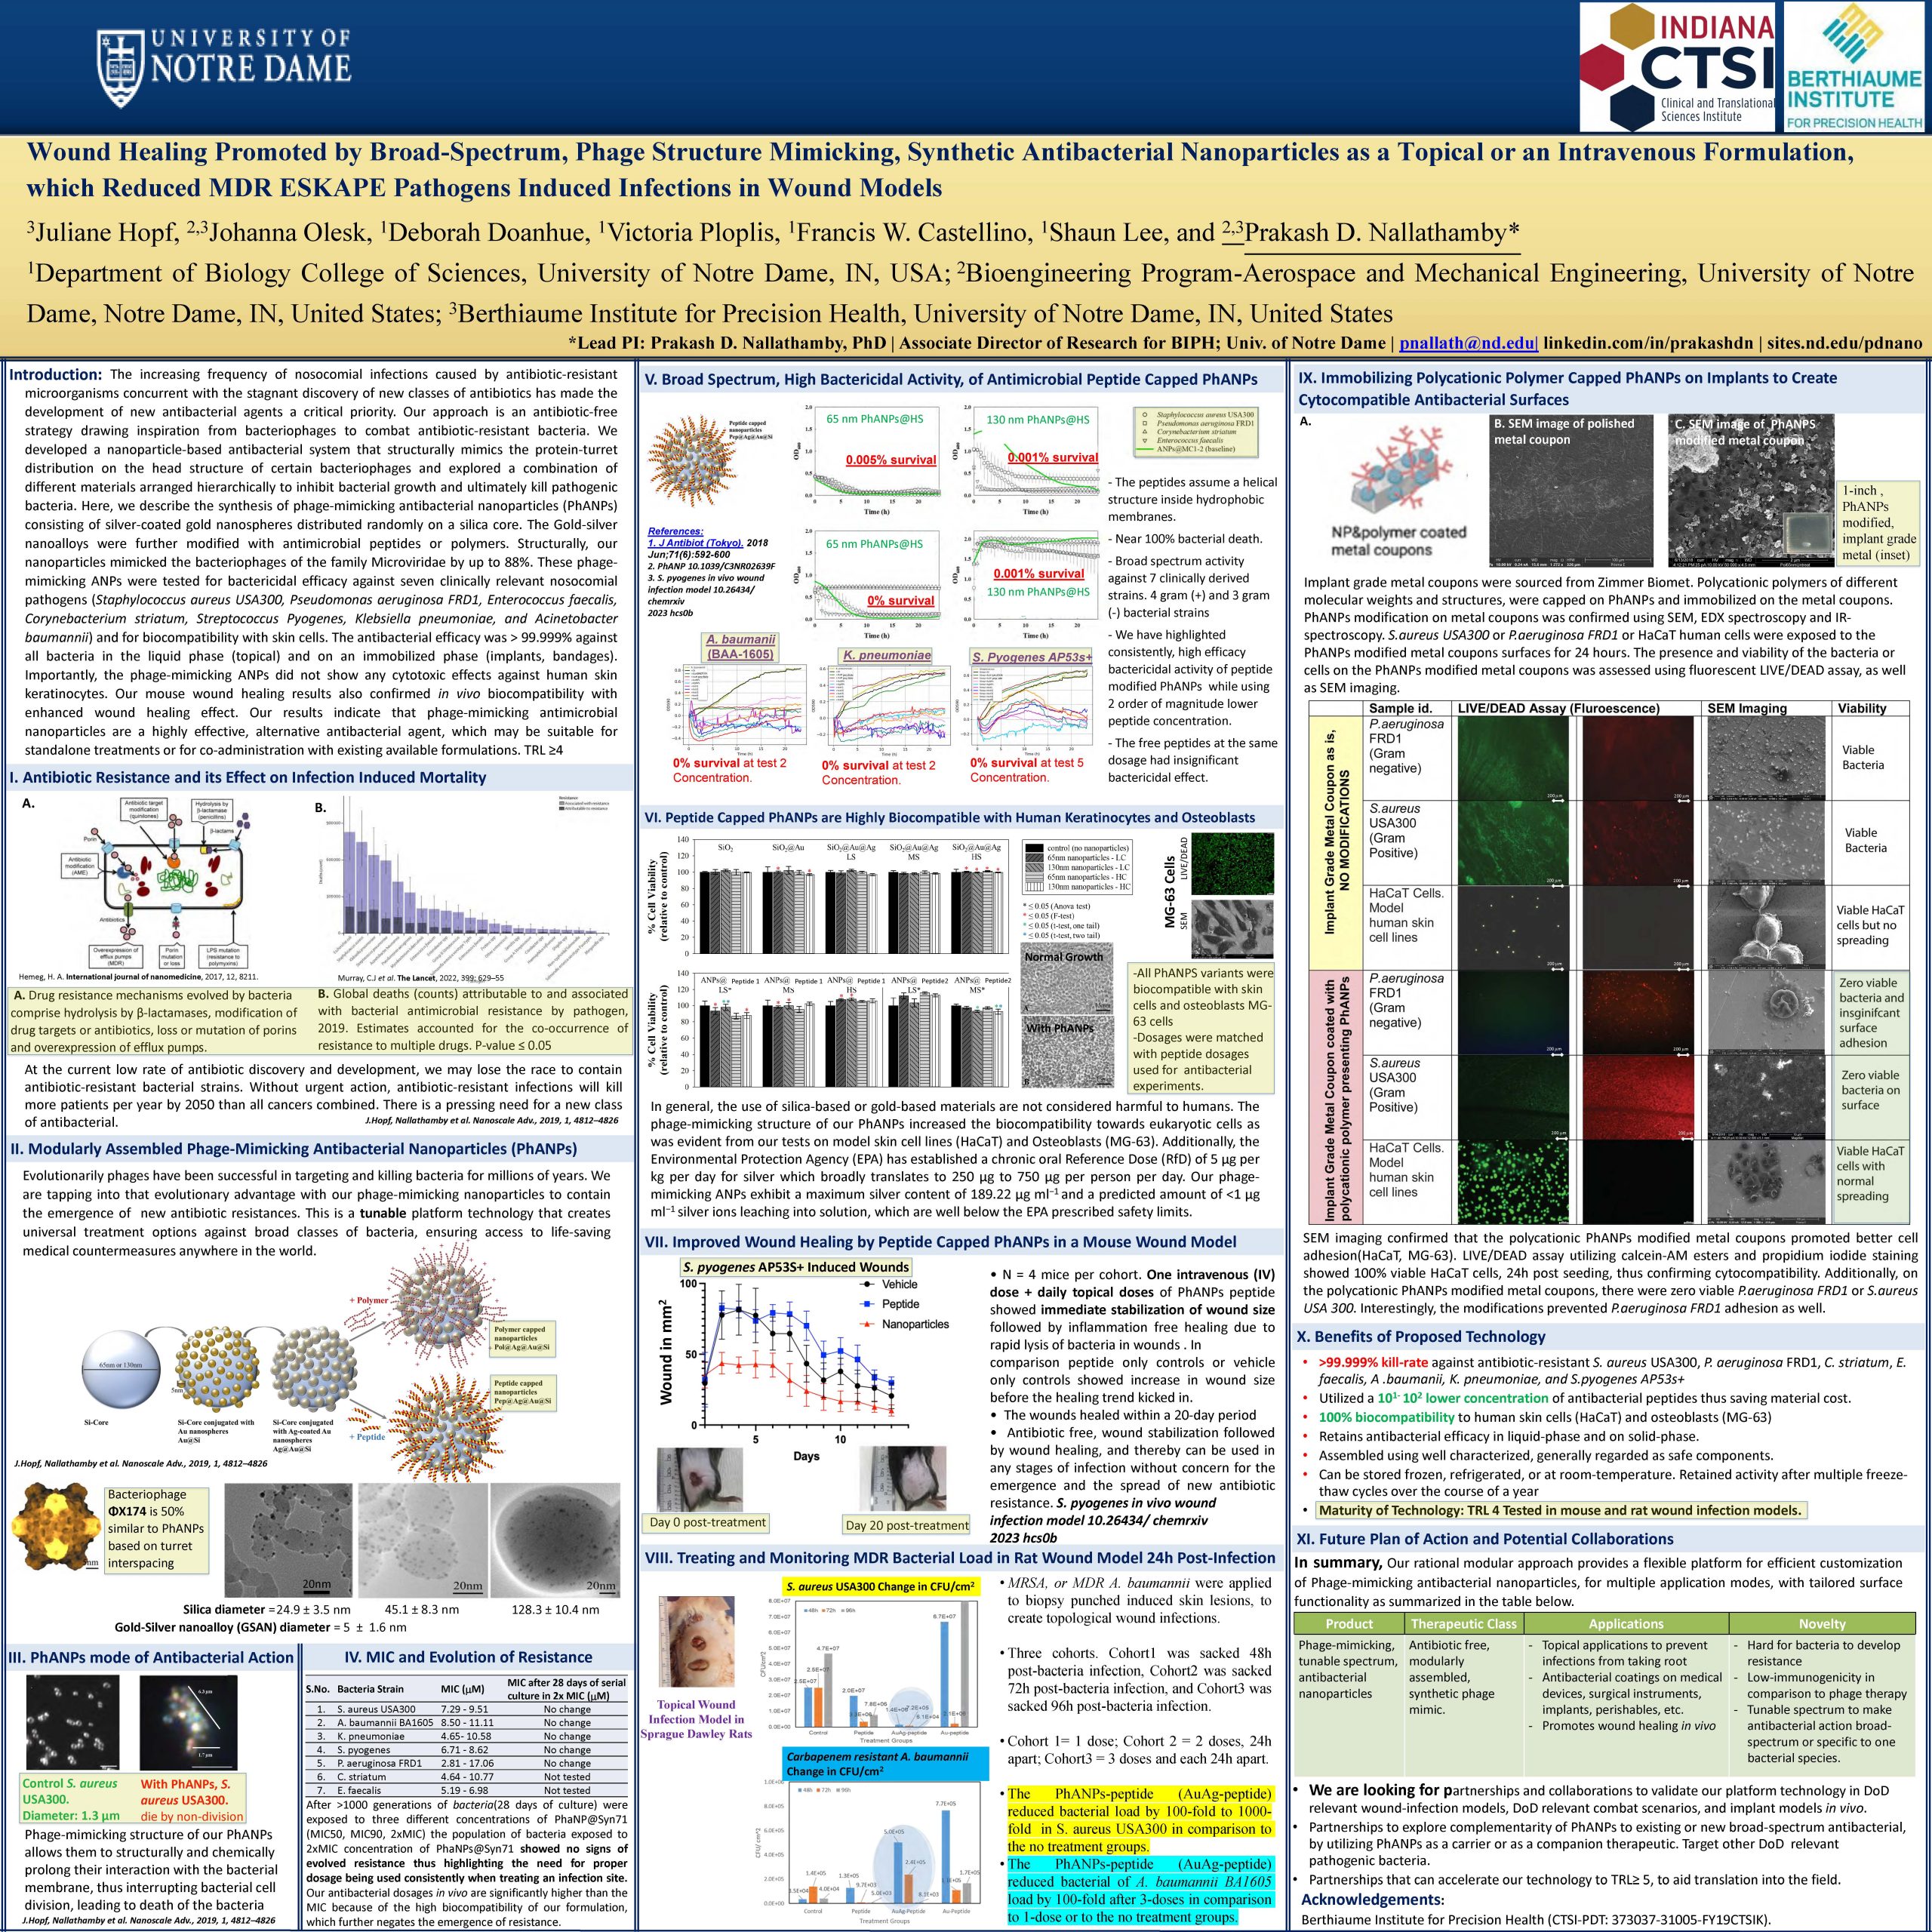 Screenshot of the Berthiaume Institute for Precision Health MHSRS poster